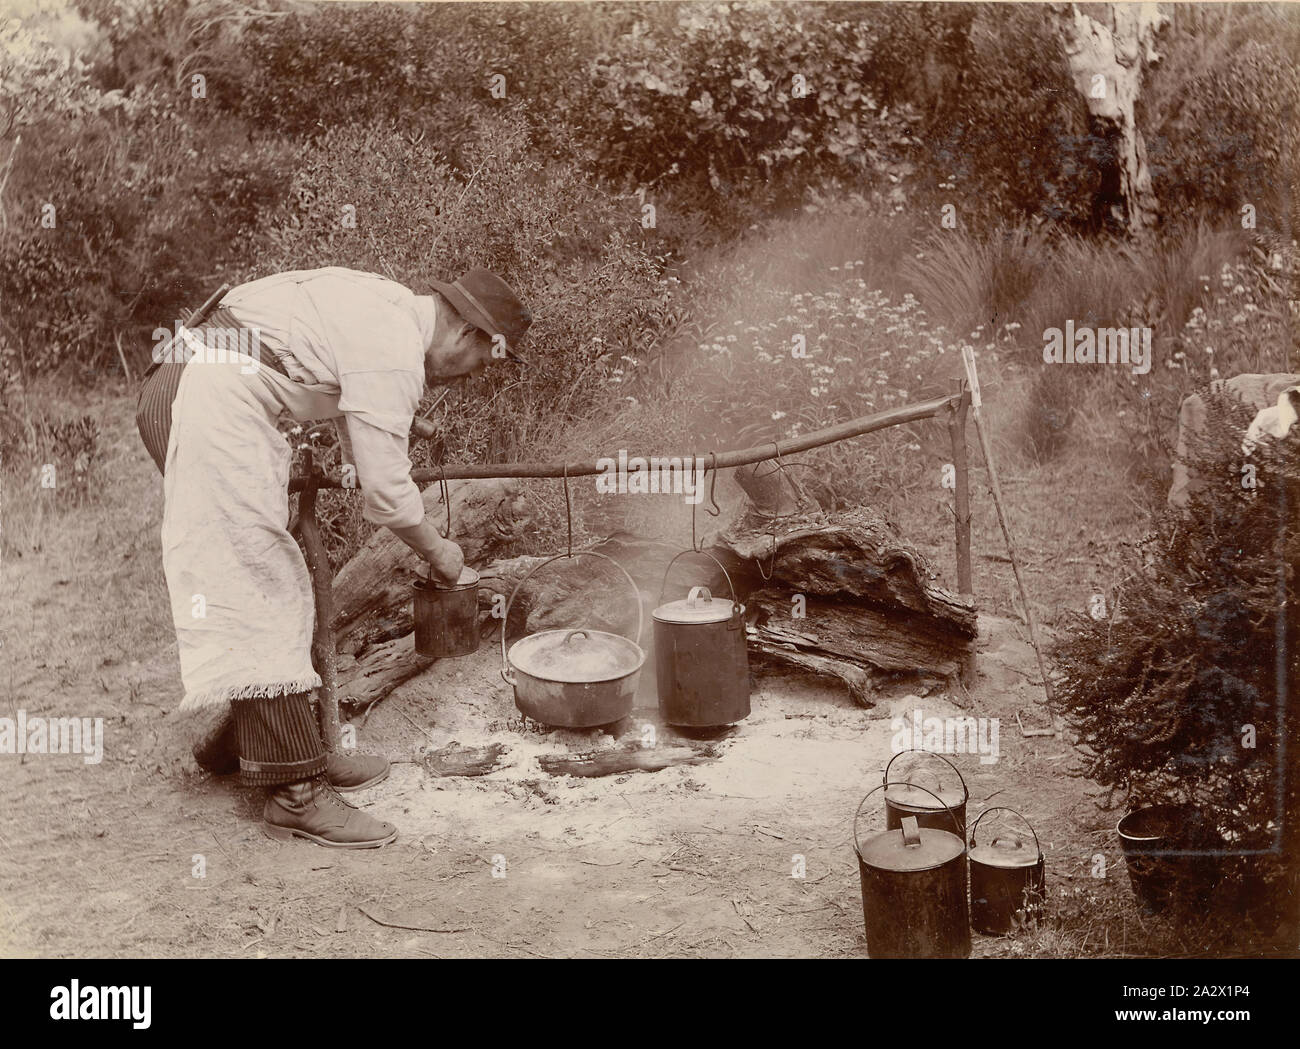 Photograph - 'Our Cook', Flinders Island, Nov 1893, Image taken by Archibald James Campell during the Victorian Field Naturalsits expedition to the Furneaux Group of islands, Bass Strait, in November 1893. It is of sixty-nine photographs in a bound album. the expedition. This image shows the 'cook' at Stock Photo